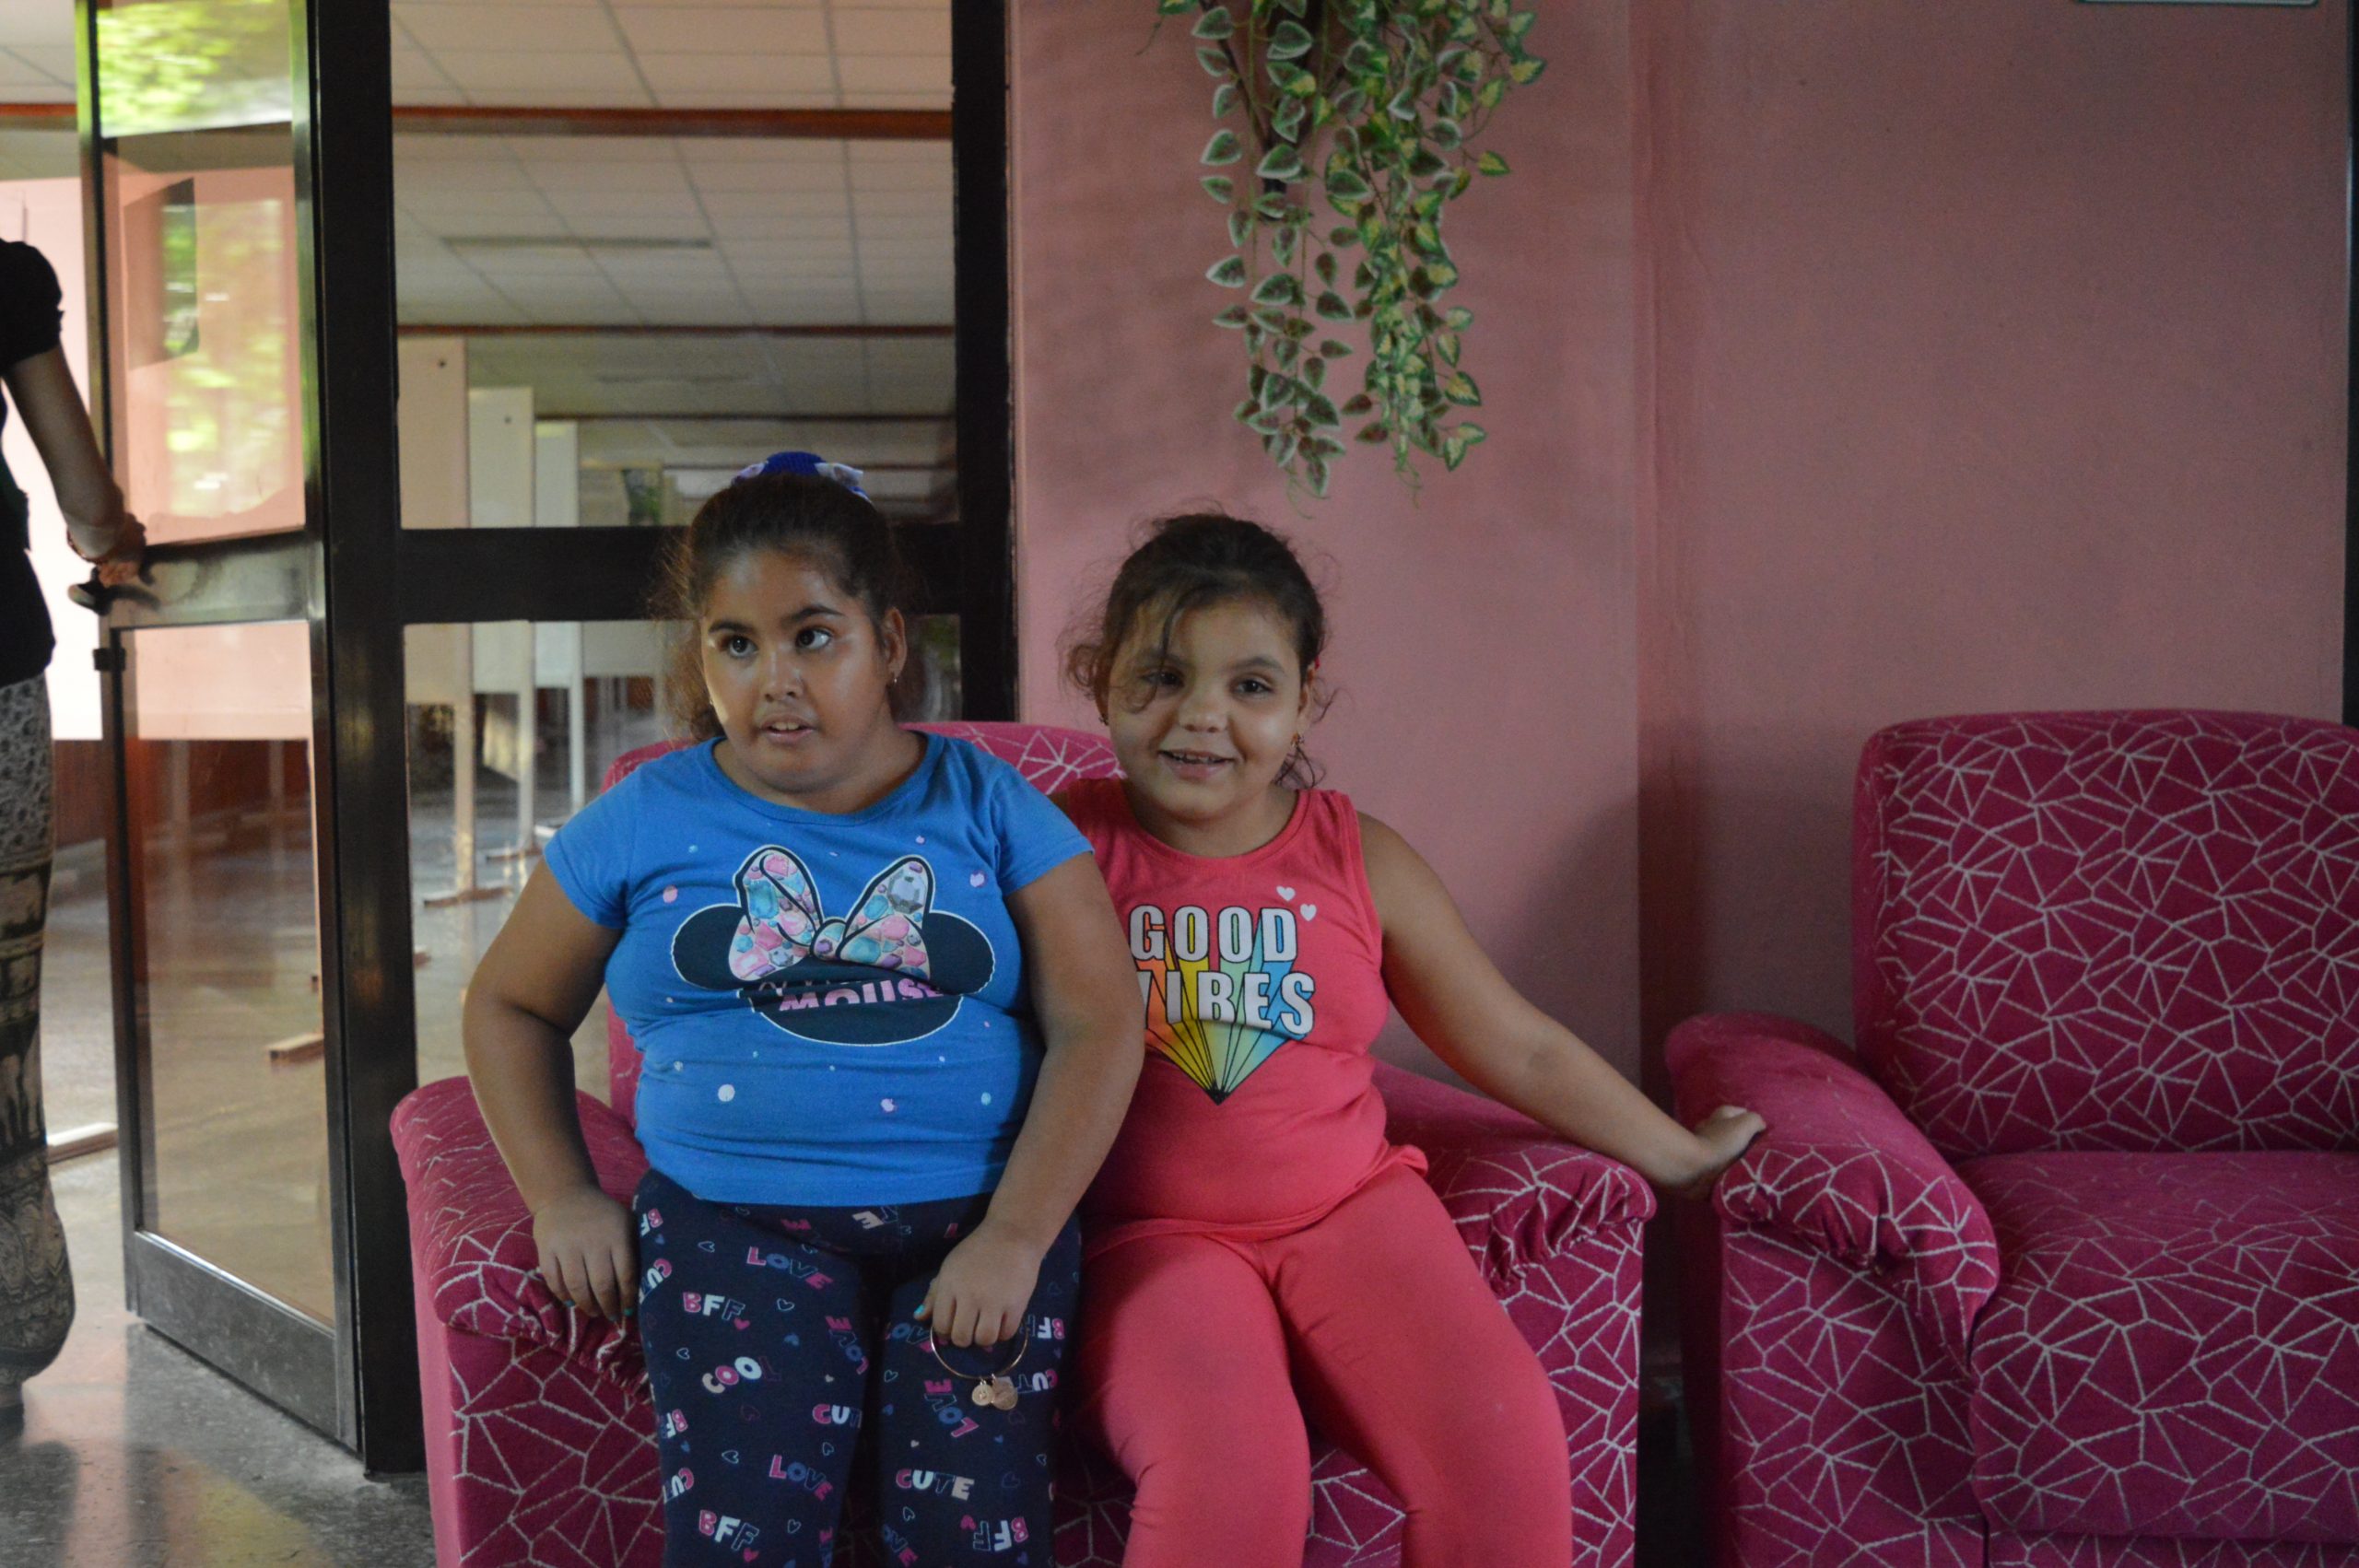 Two young girls sitting on pink sofas